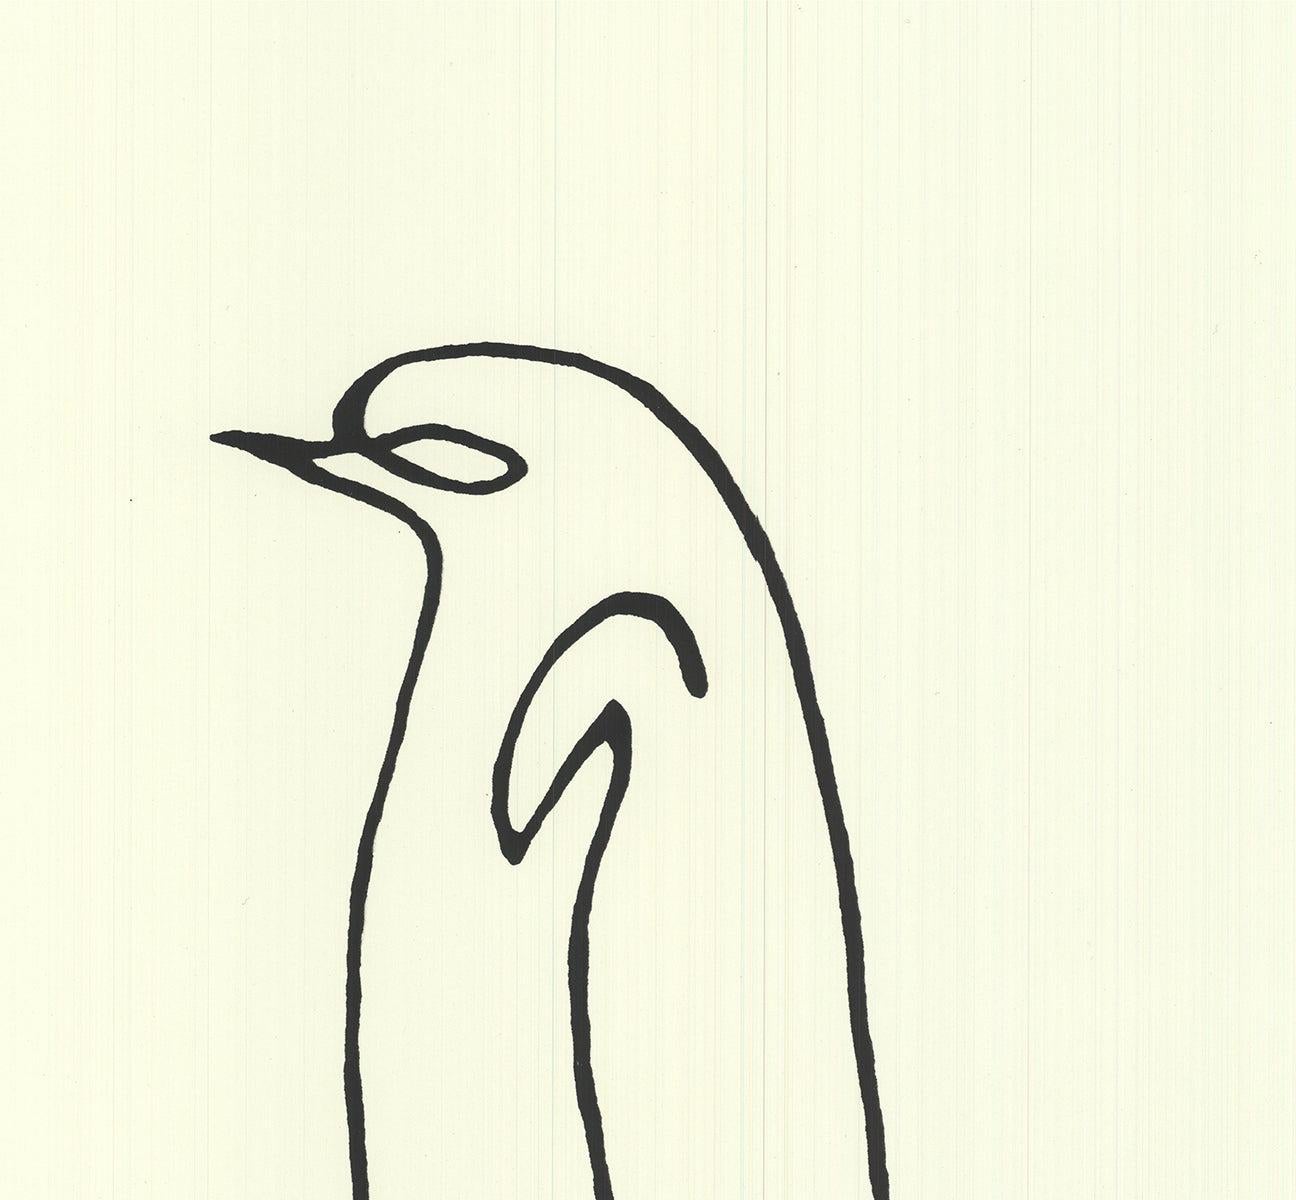 Pablo Picasso 'The Penguin' 2006- Offset Lithograph For Sale 2